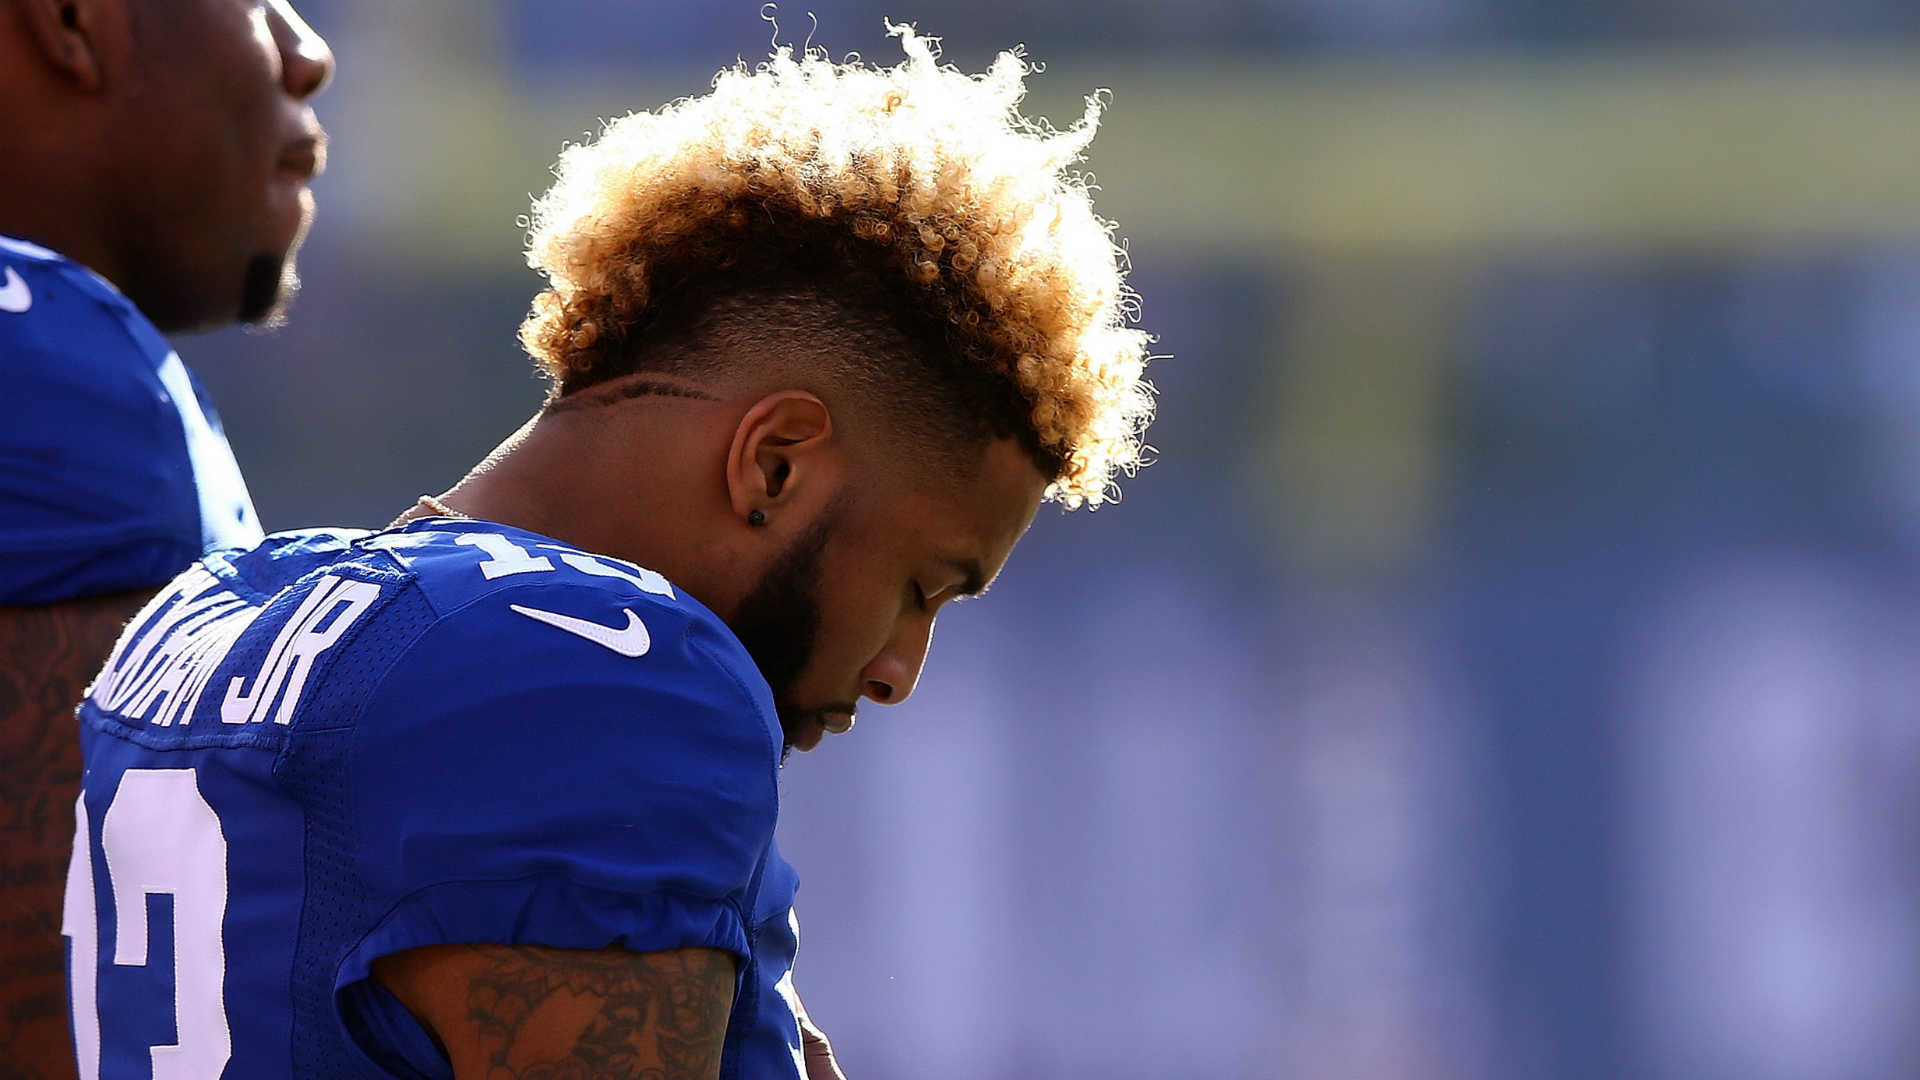 Odell Beckham's dirty hit can't be excused, deserved stiffer penalty | NFL  | Sporting News